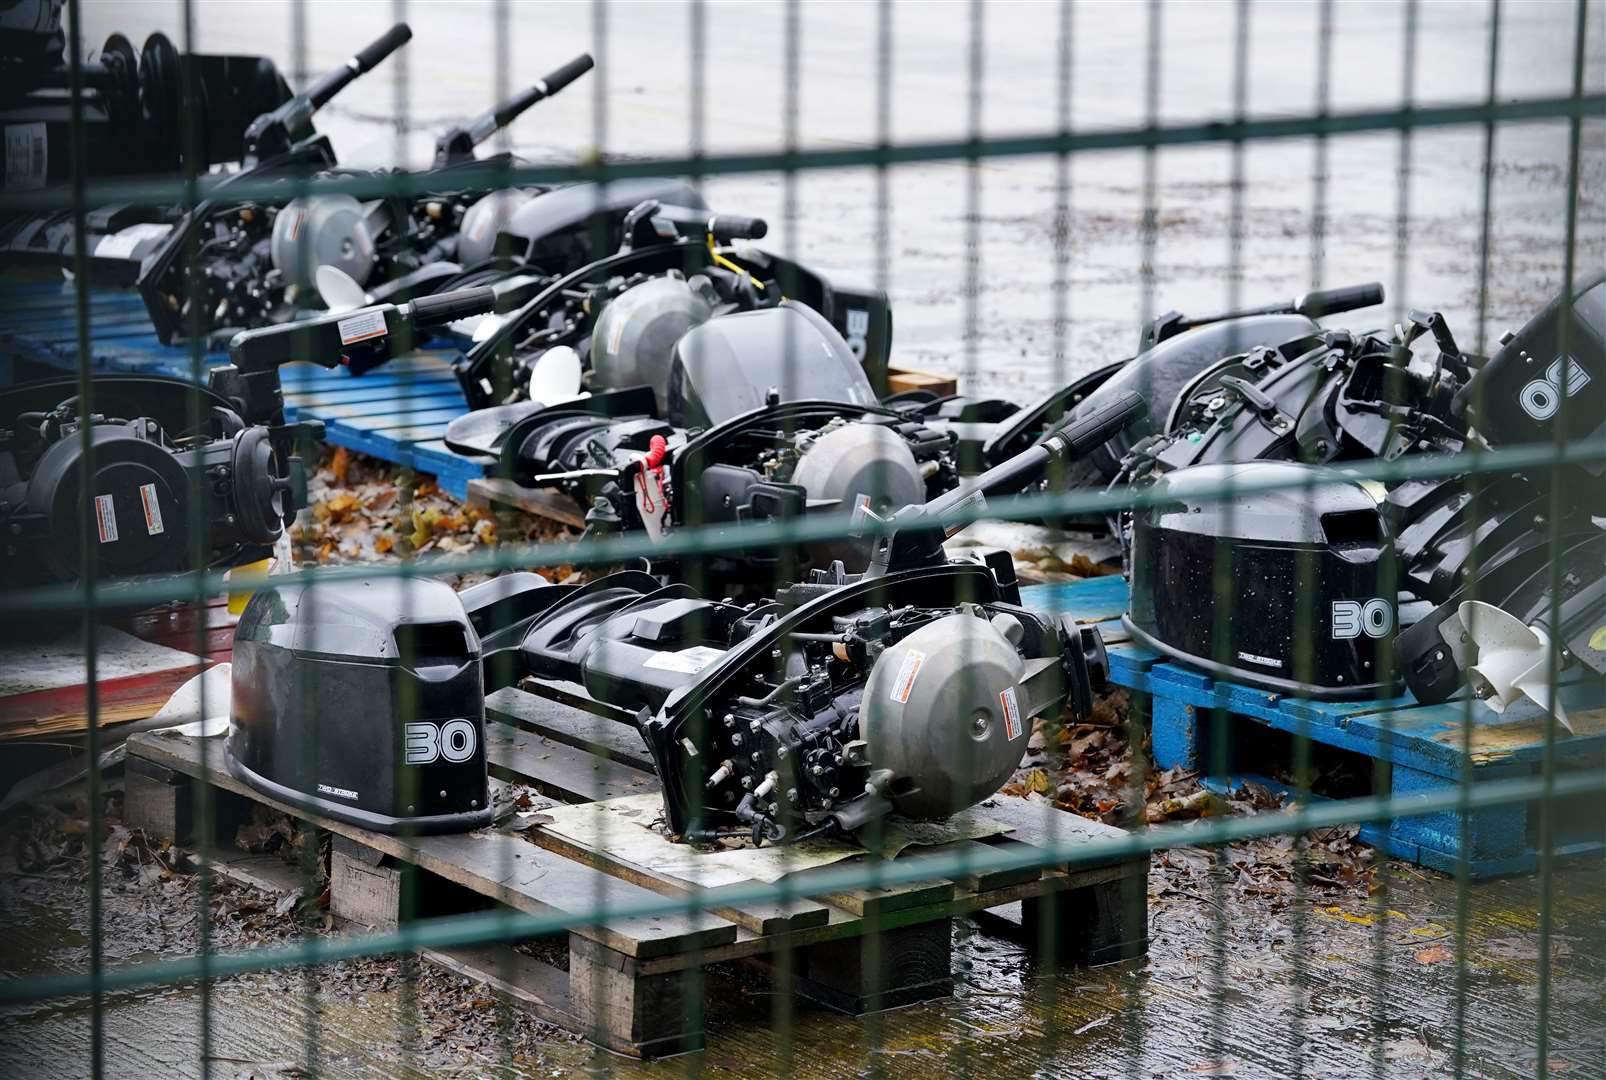 A view of small boat engines used to cross the Channel by people thought to be migrants at a warehouse facility in Dover, Kent (Gareth Fuller/PA)